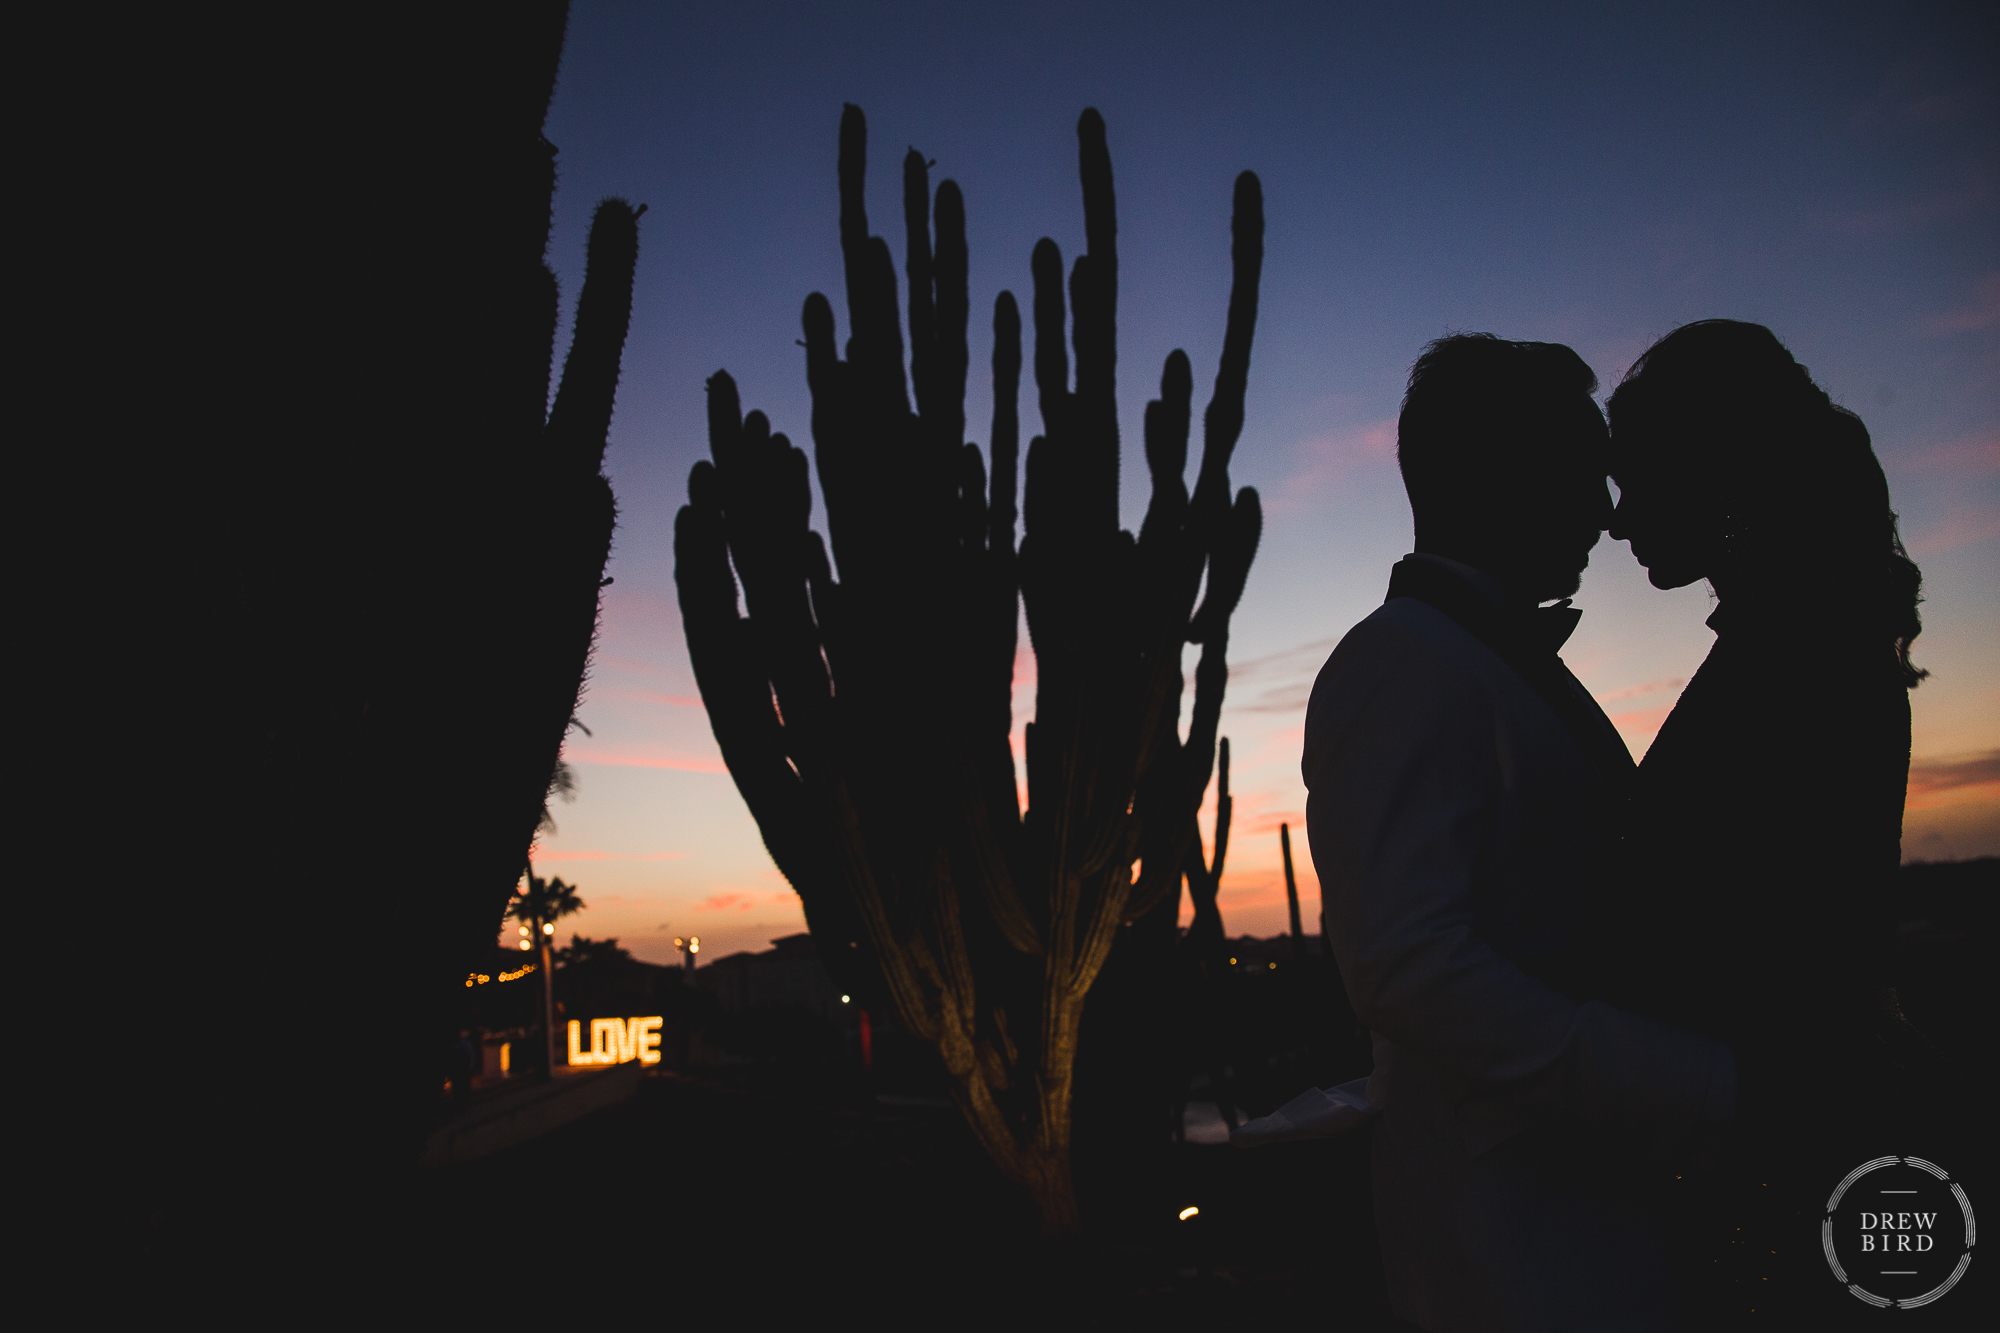 A very creative and artistic wedding portrait with the bride and groom standing together and silhouetted by the sunset so that their heads together make the shape of a heart. The word love can be seen in the distance through silhouettes of giant cactus plants. Indian wedding reception photos at Tierra del Sol in Aruba.